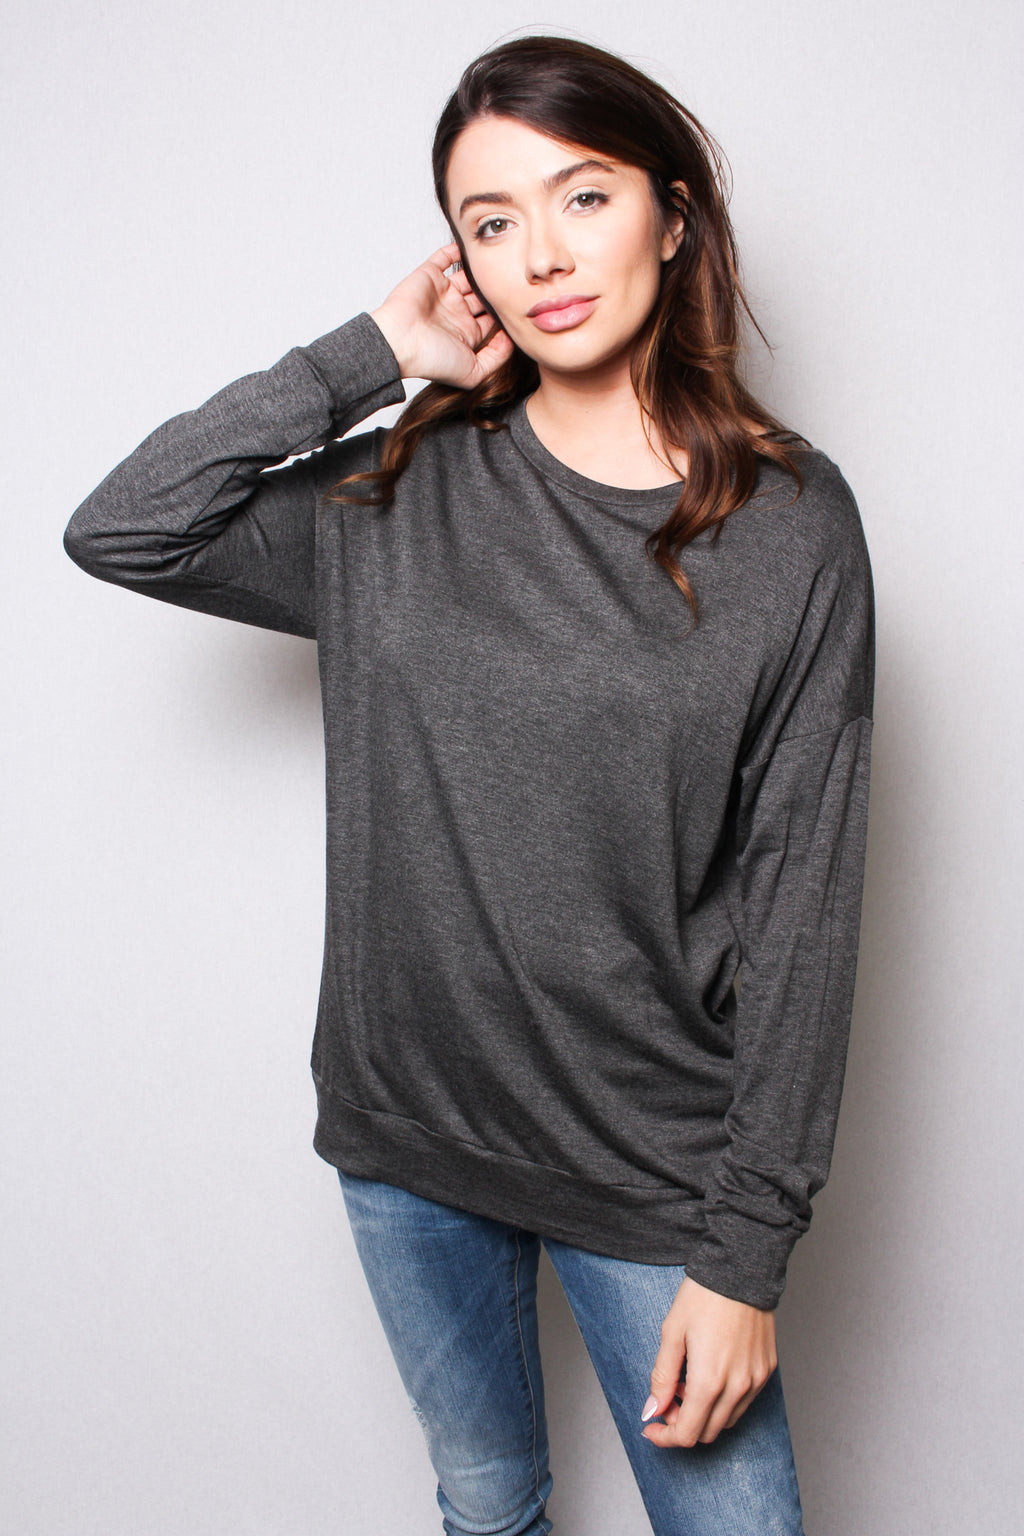 Women's Long Sleeve Light Weight French Terry Top